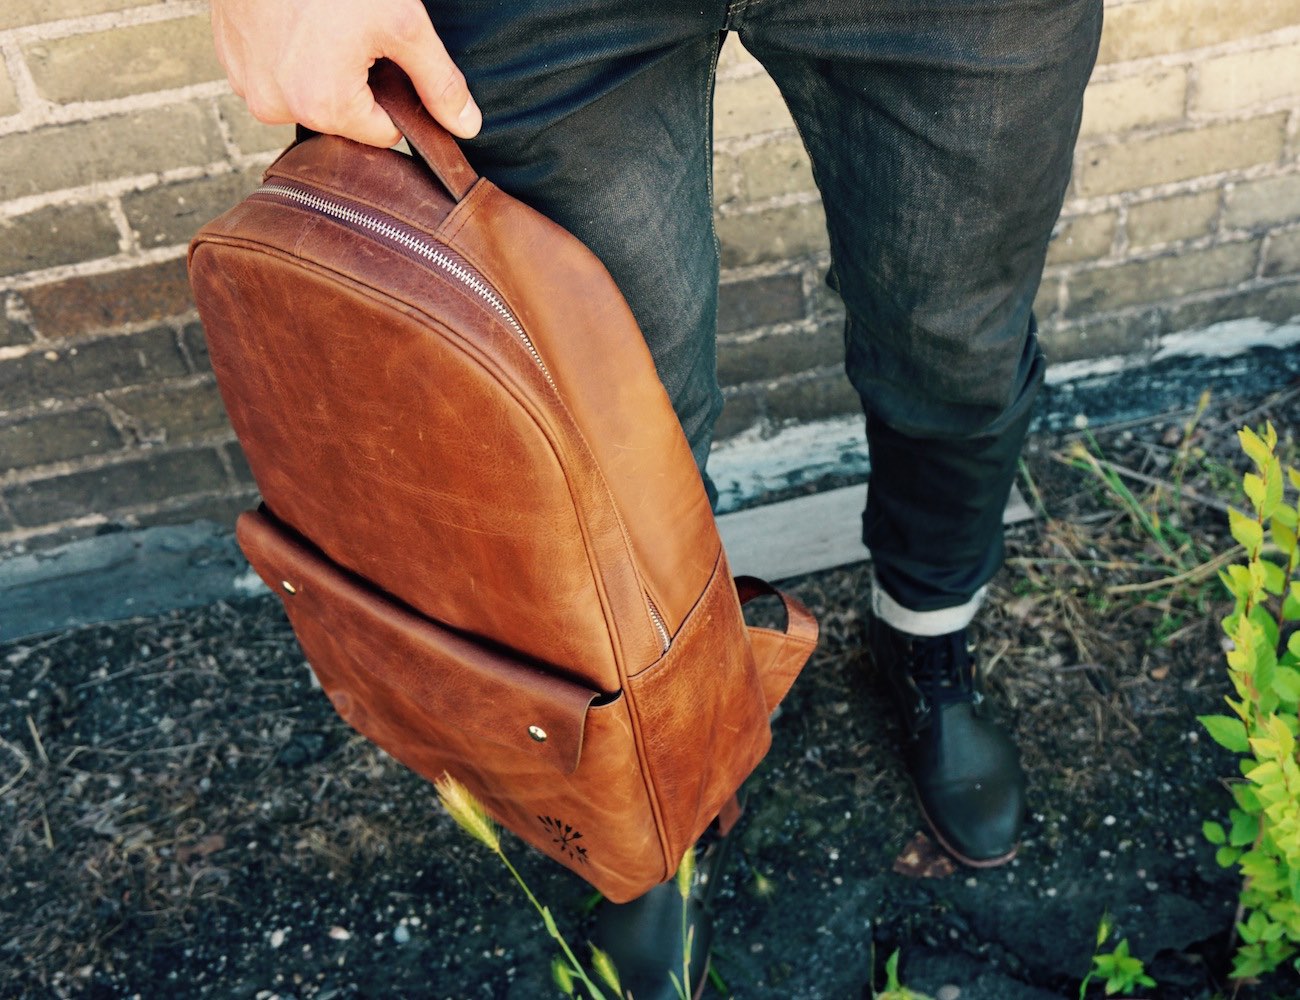 Get ready to take on the world with the Minimalist Leather Backpack by Päsk Goods.